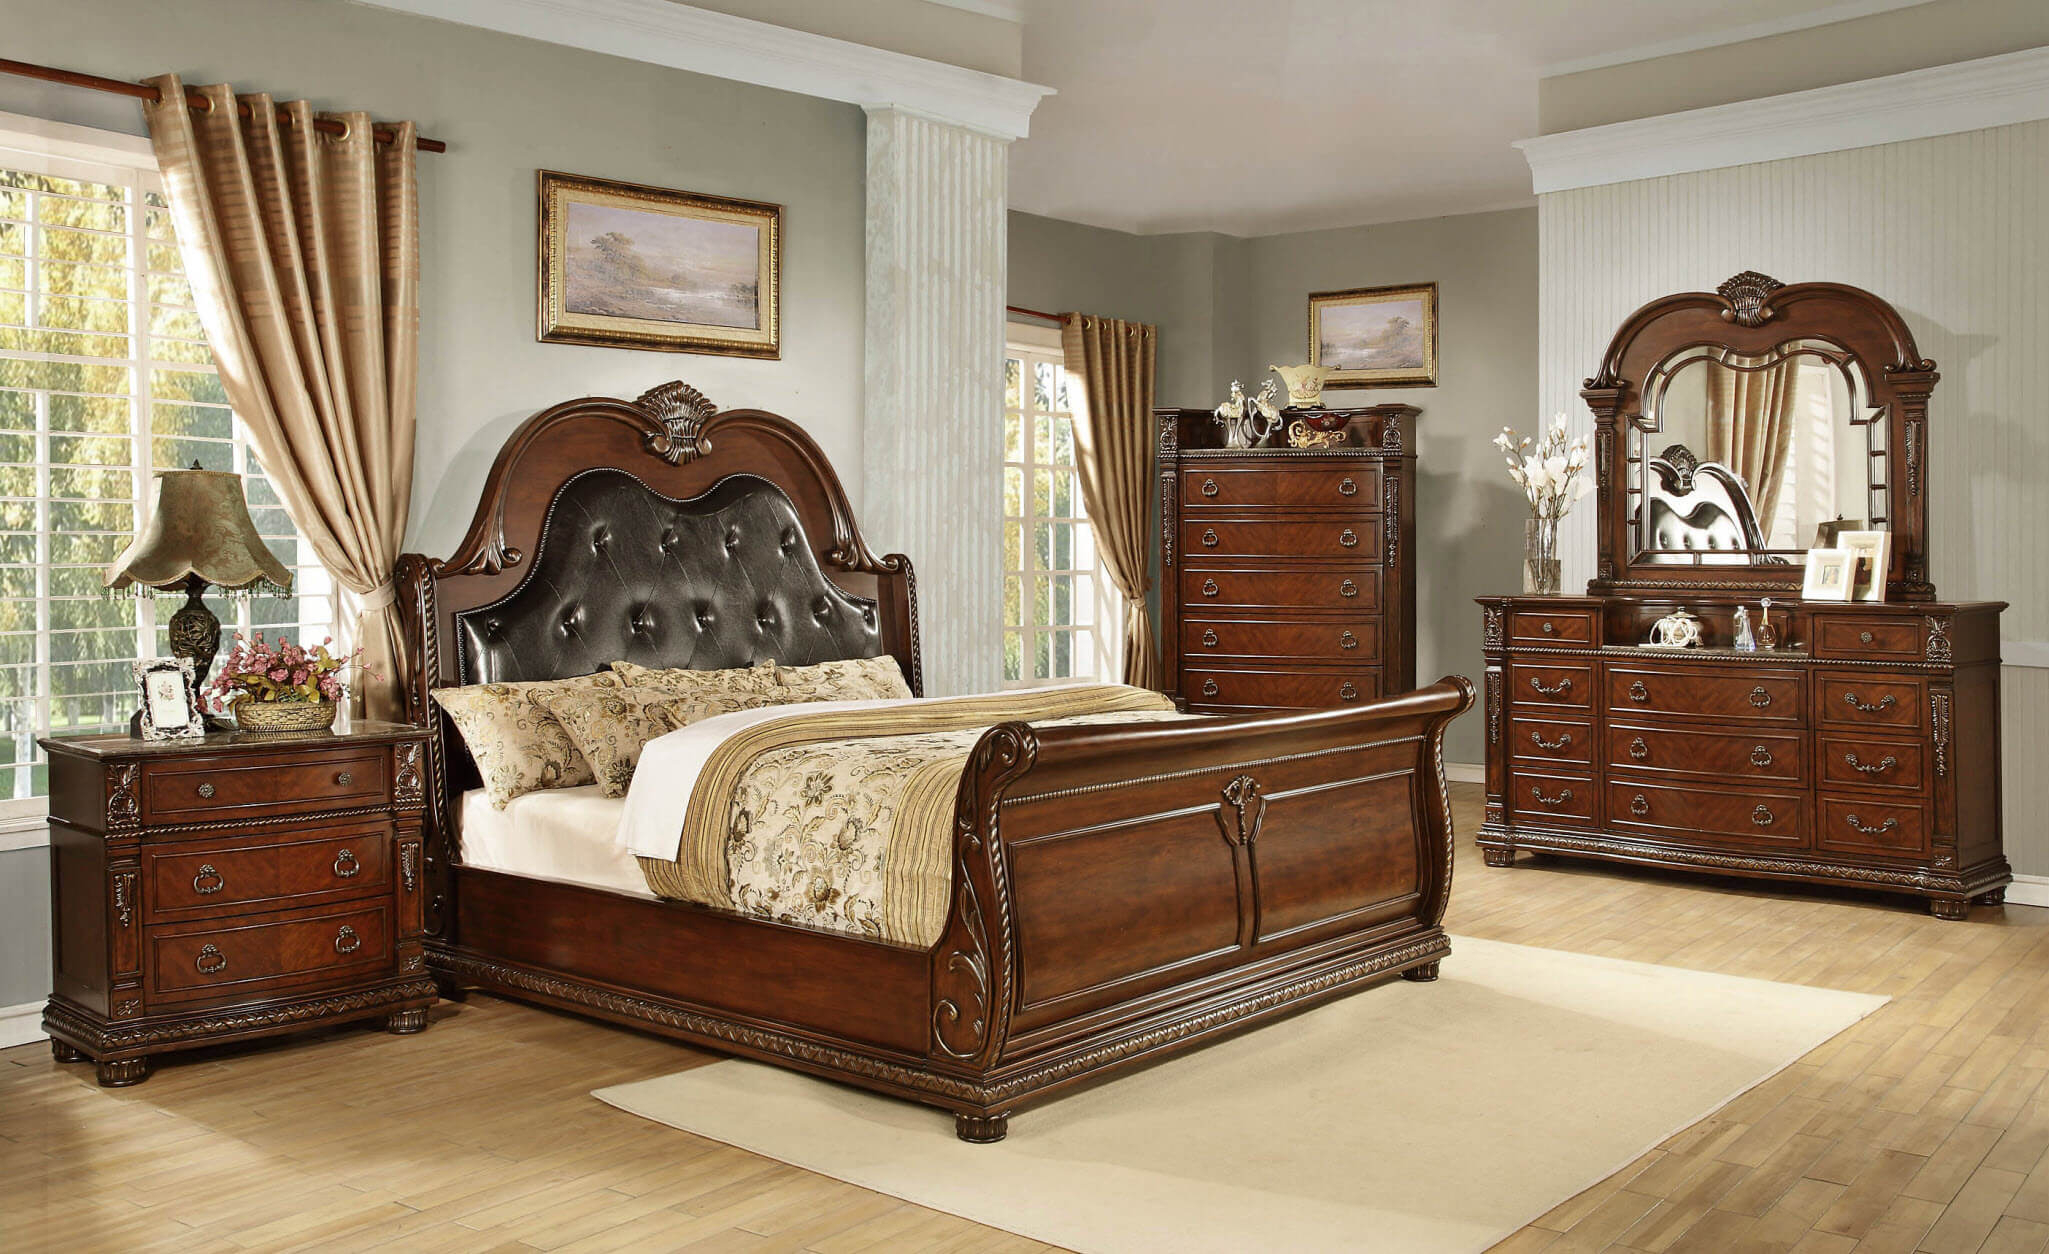 B718 Palace Marble Top Bedroom Set Global Trading within measurements 2049 X 1254